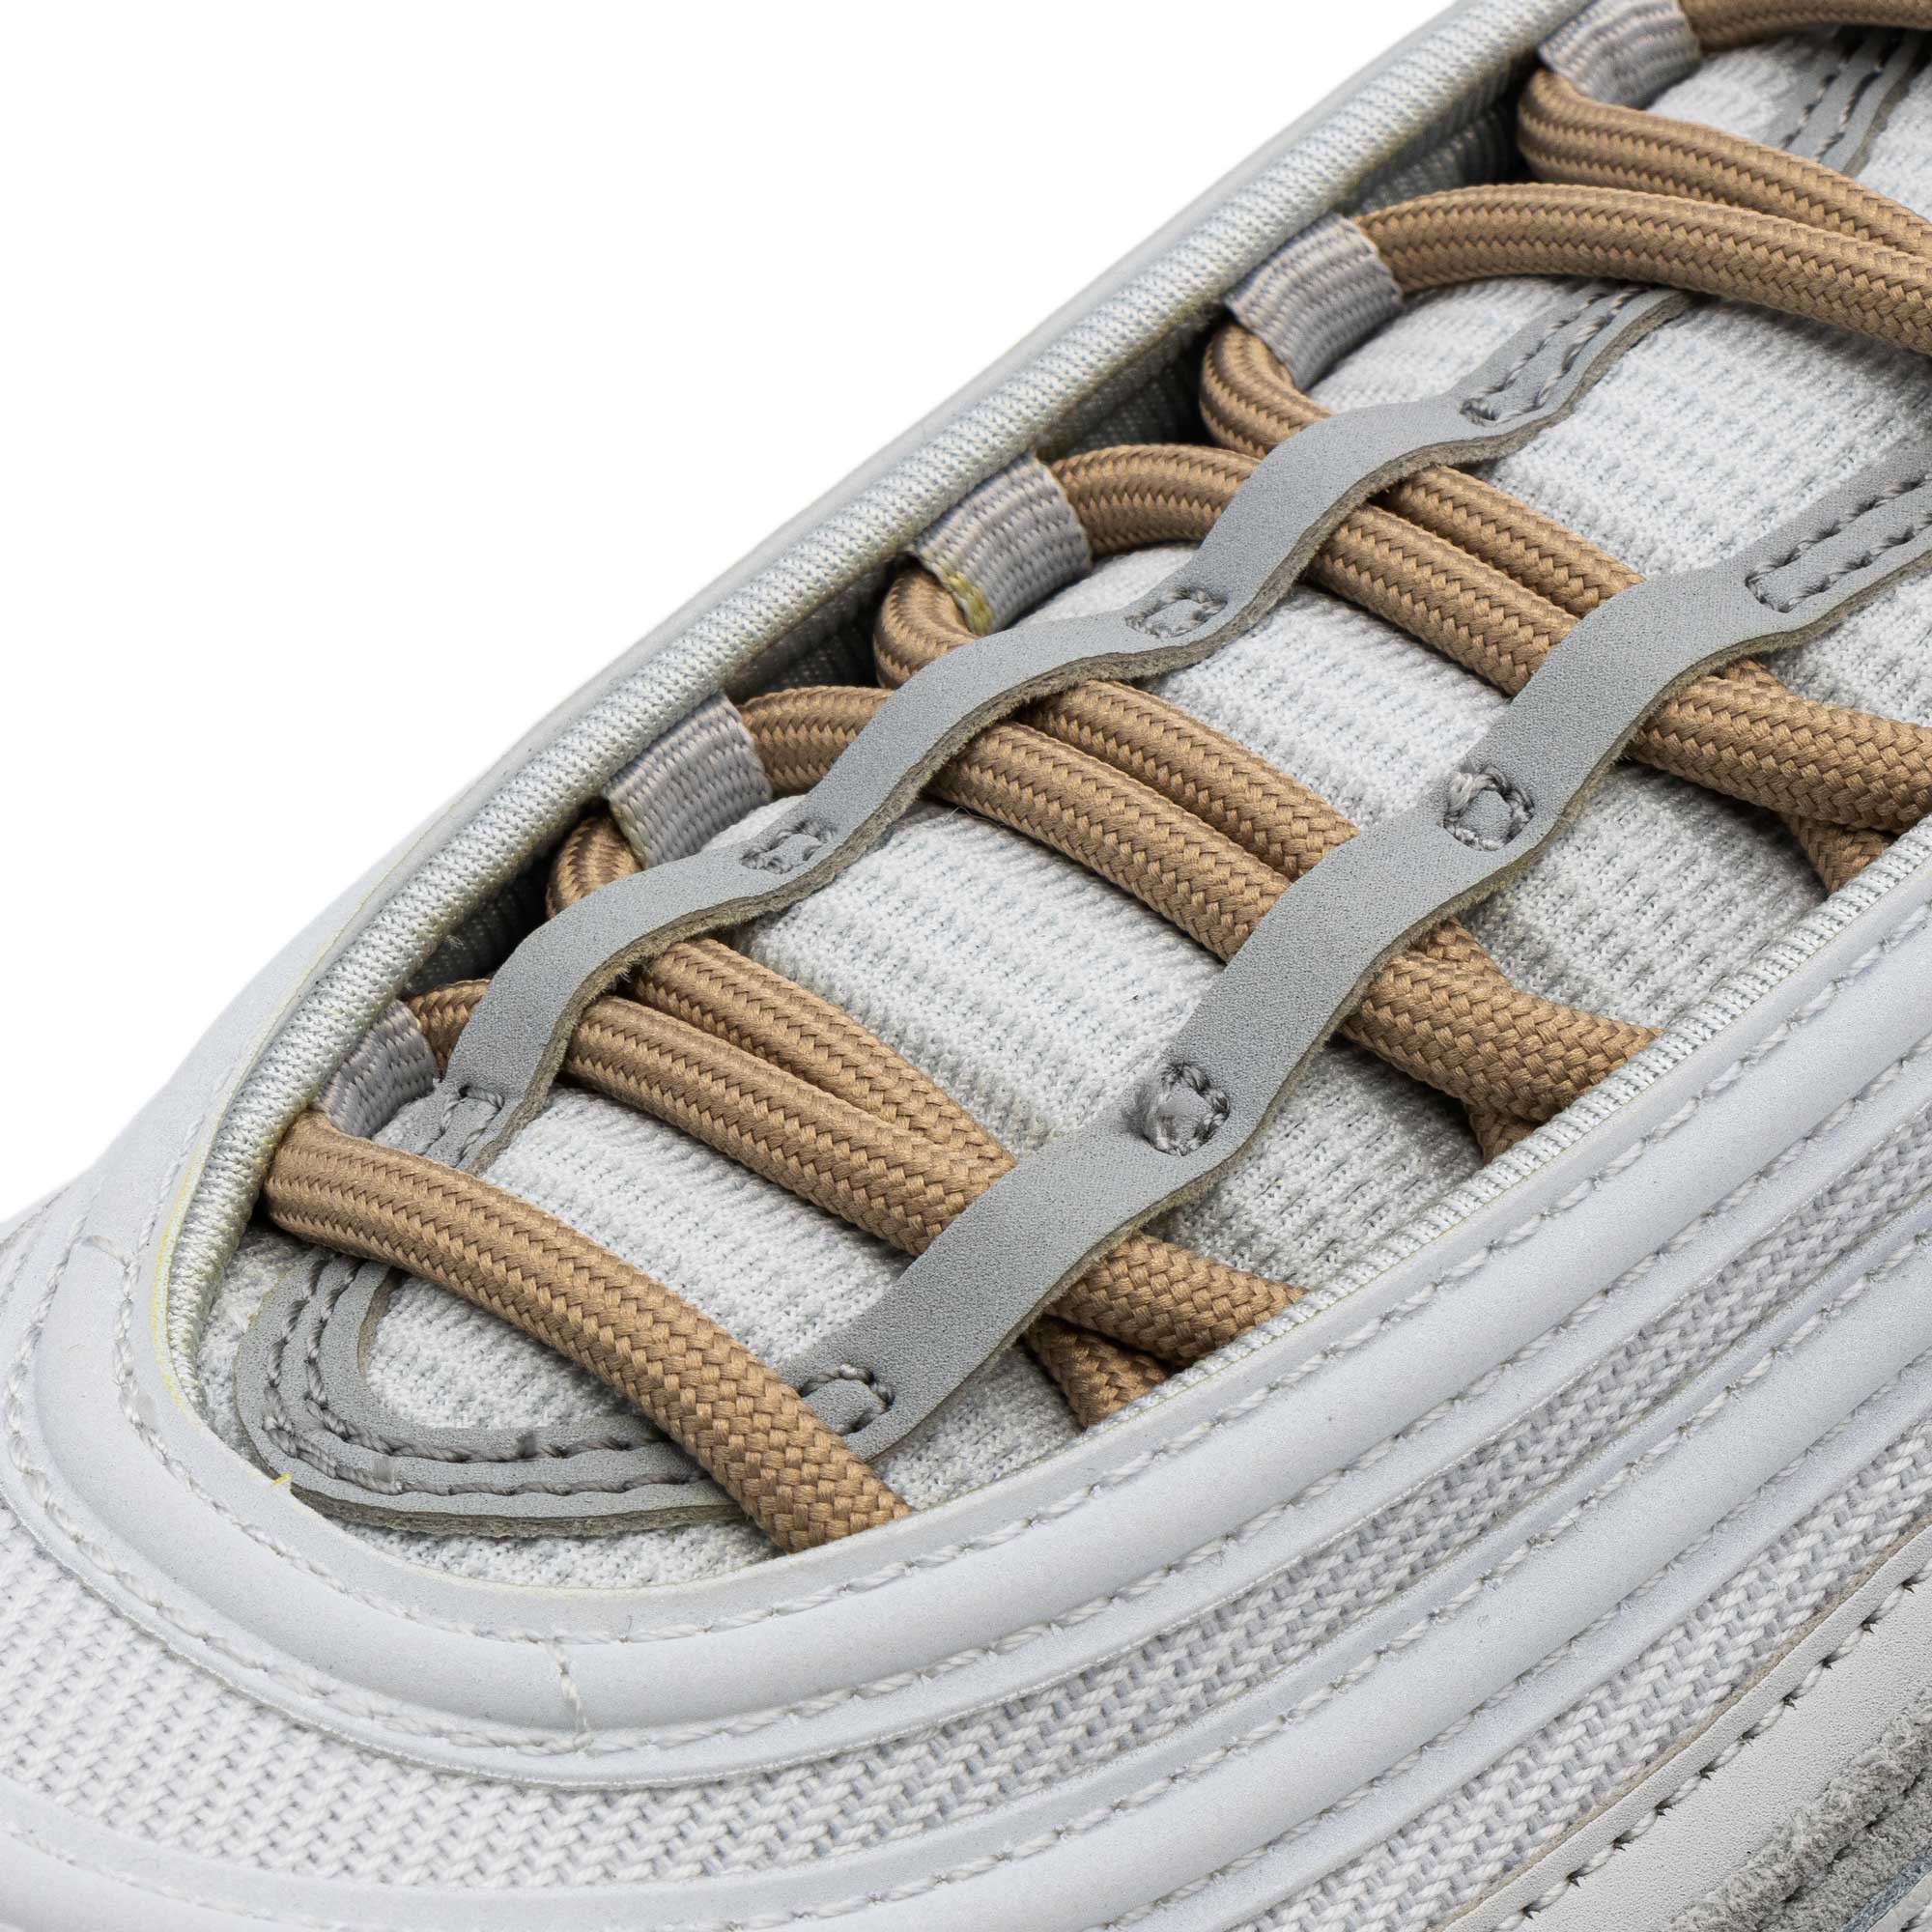 Oxford Tan Rope Laces - Angelus Direct